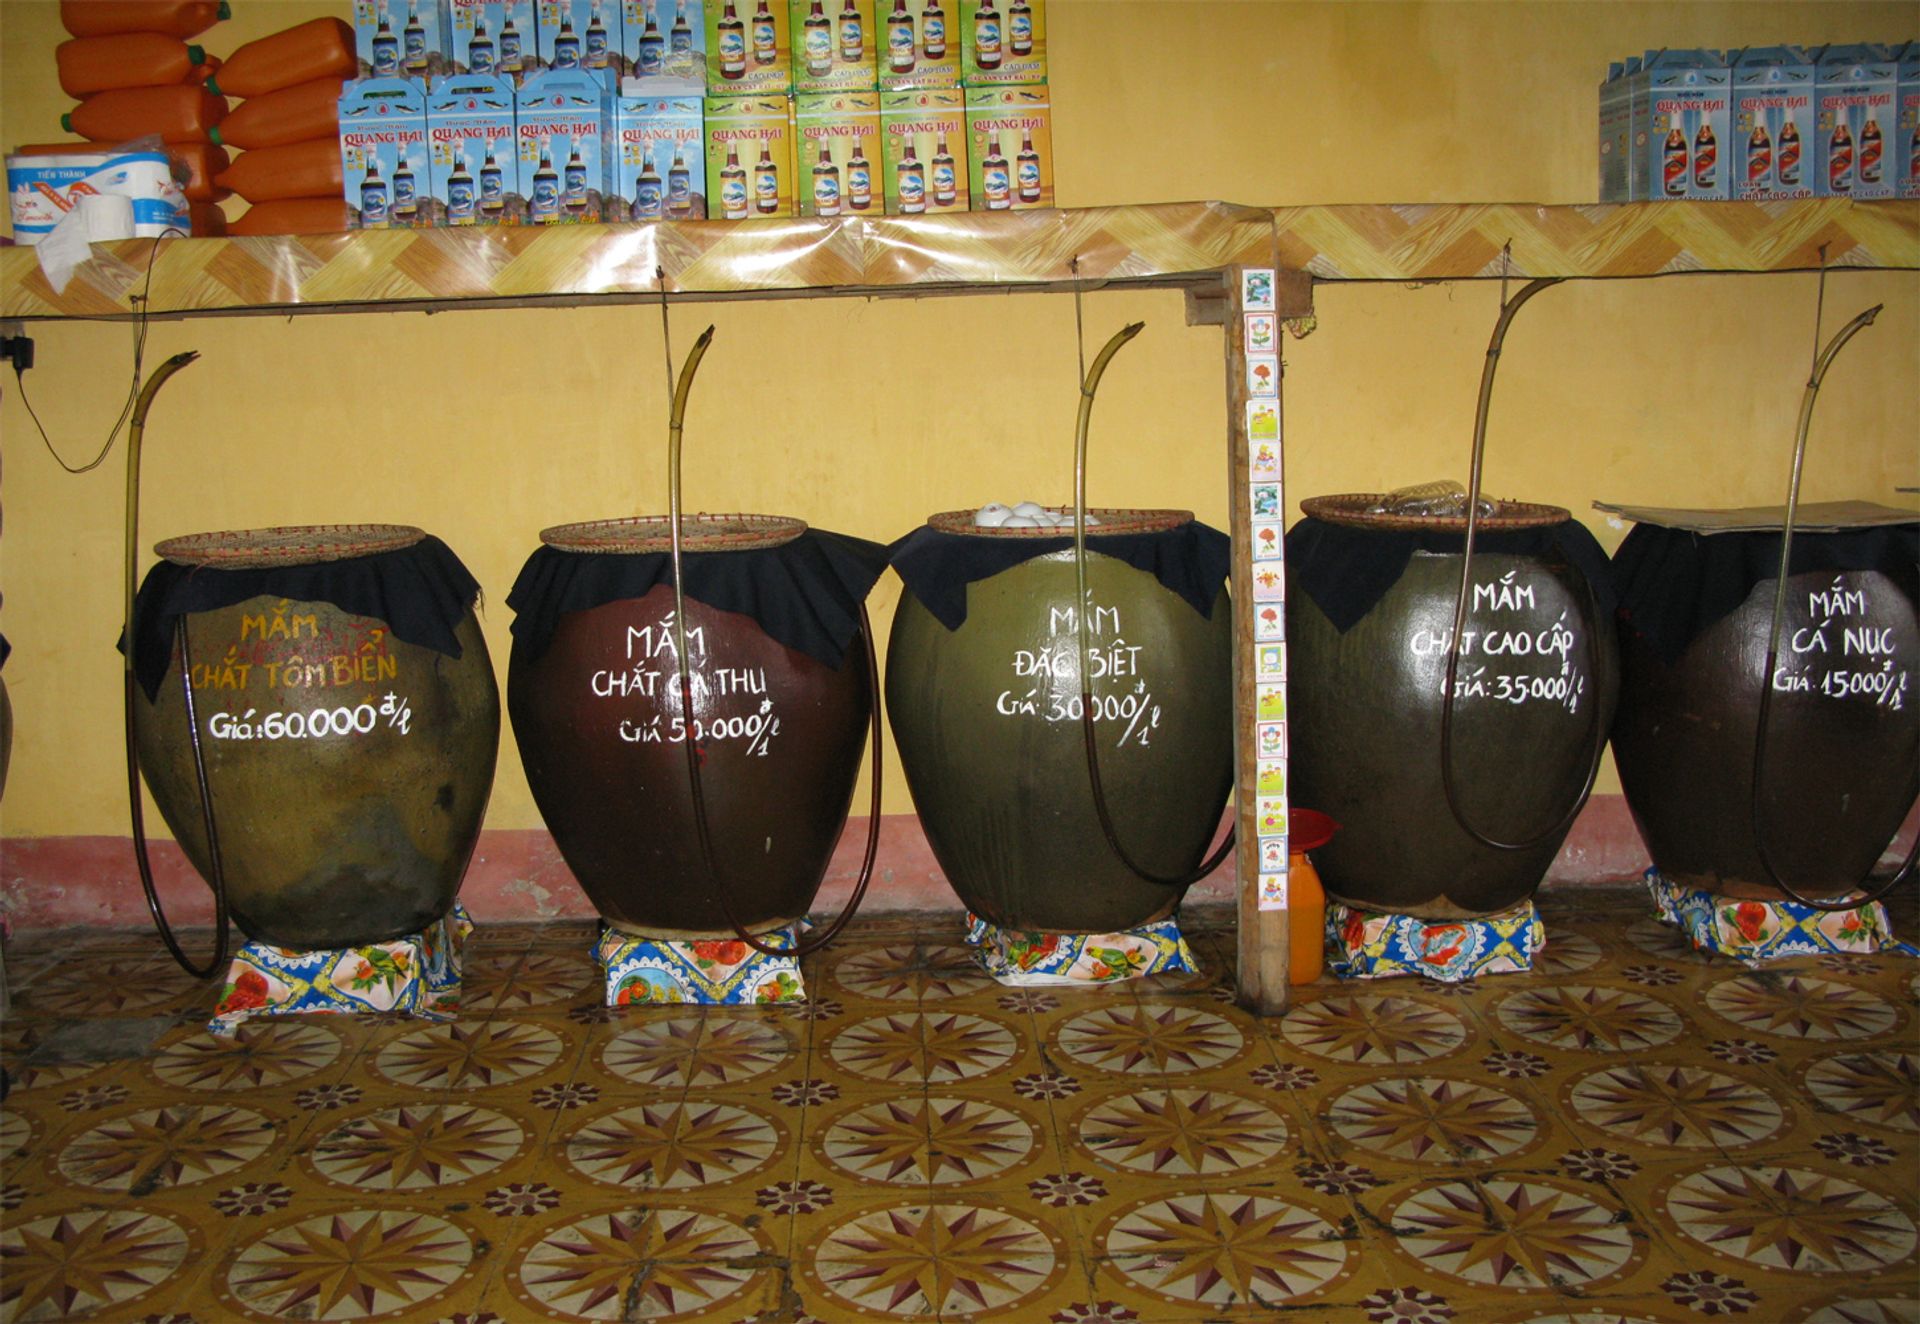 Cat Hai fish sauce is made according to a traditional recipe